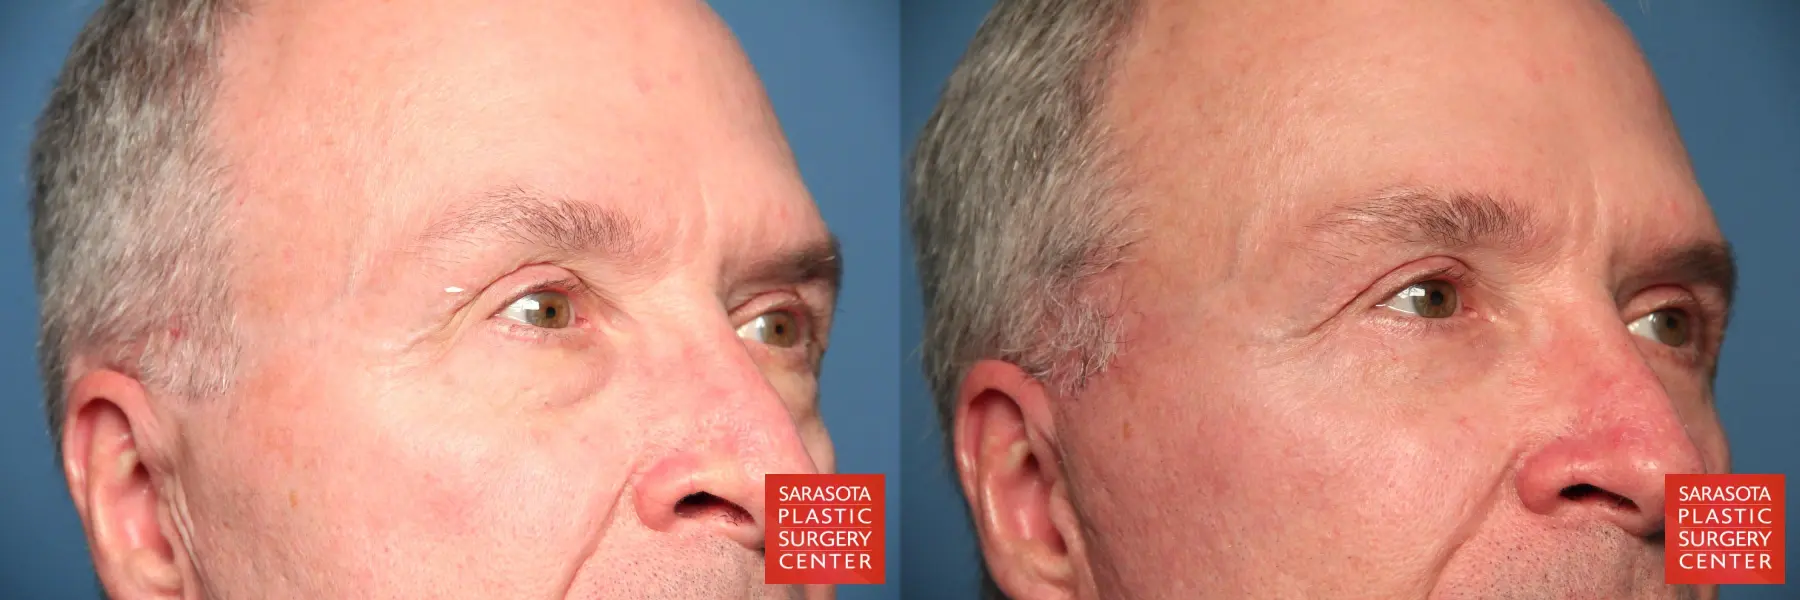 Eyelid Lift For Men Revision: Patient 1 - Before and After 5